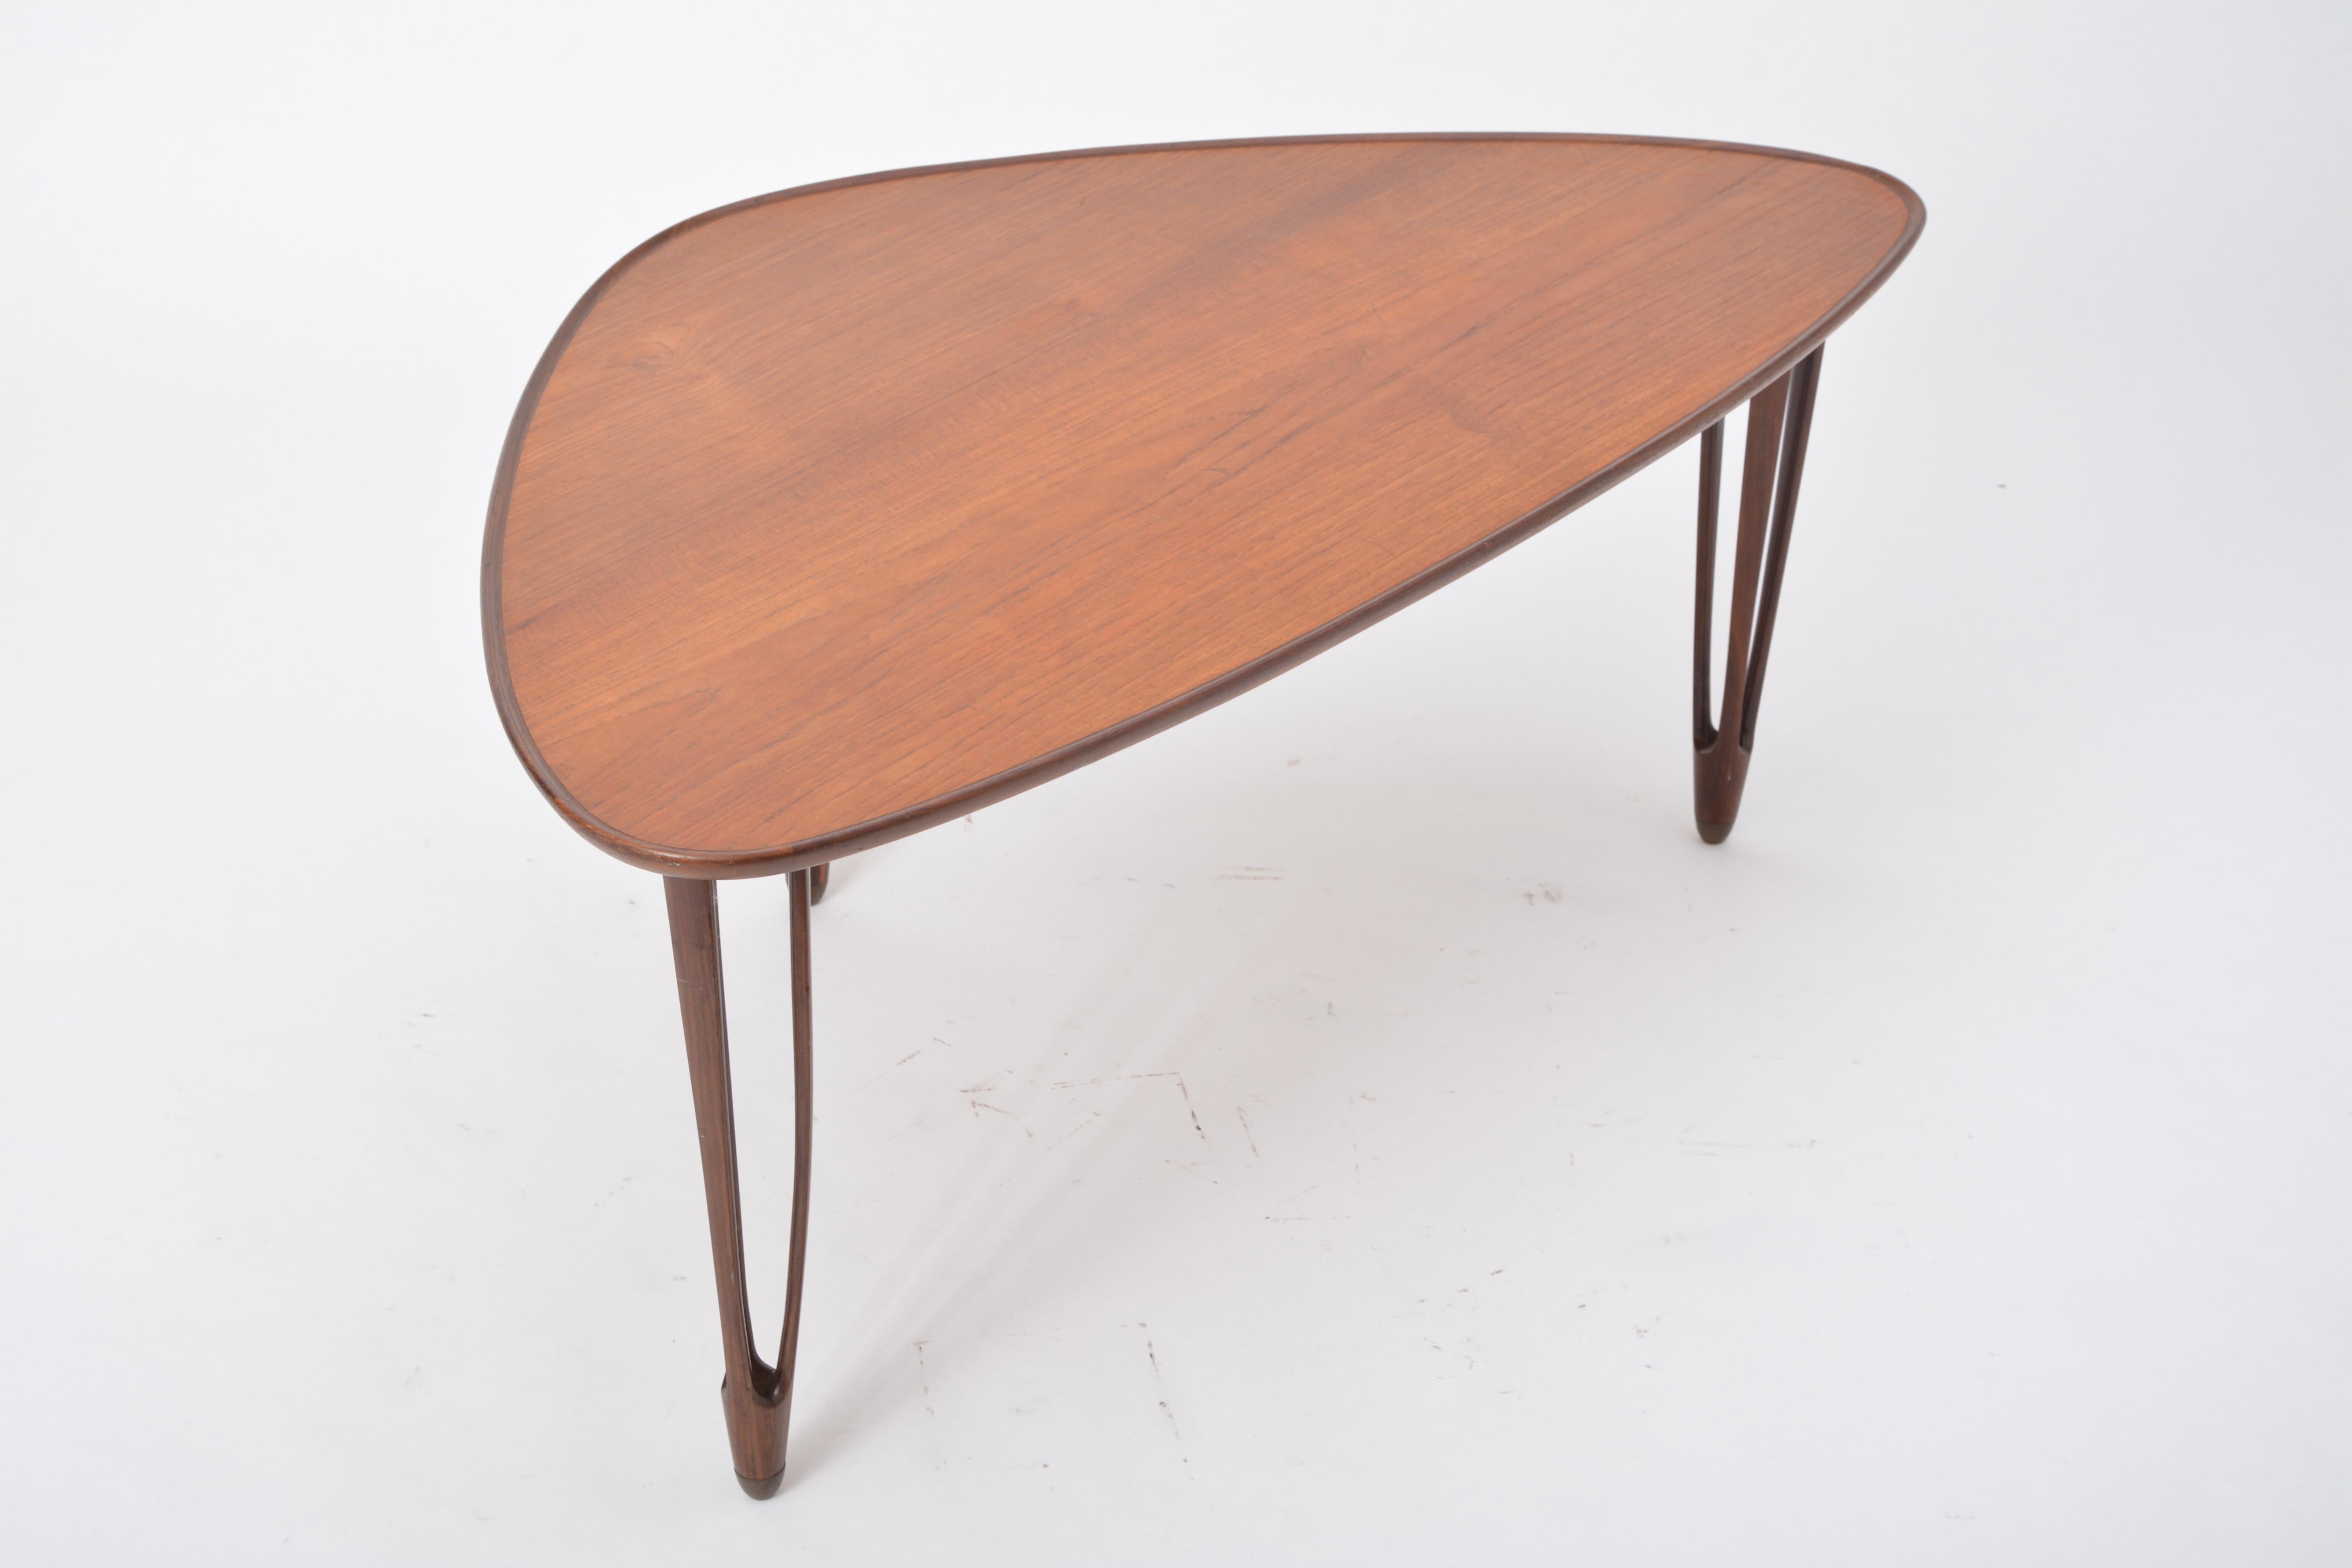 Asymmetrical tripod coffee table made from teak wood. Rounded edges, brass feet, produced by Danish company B.C. Møbler in the 1950s.